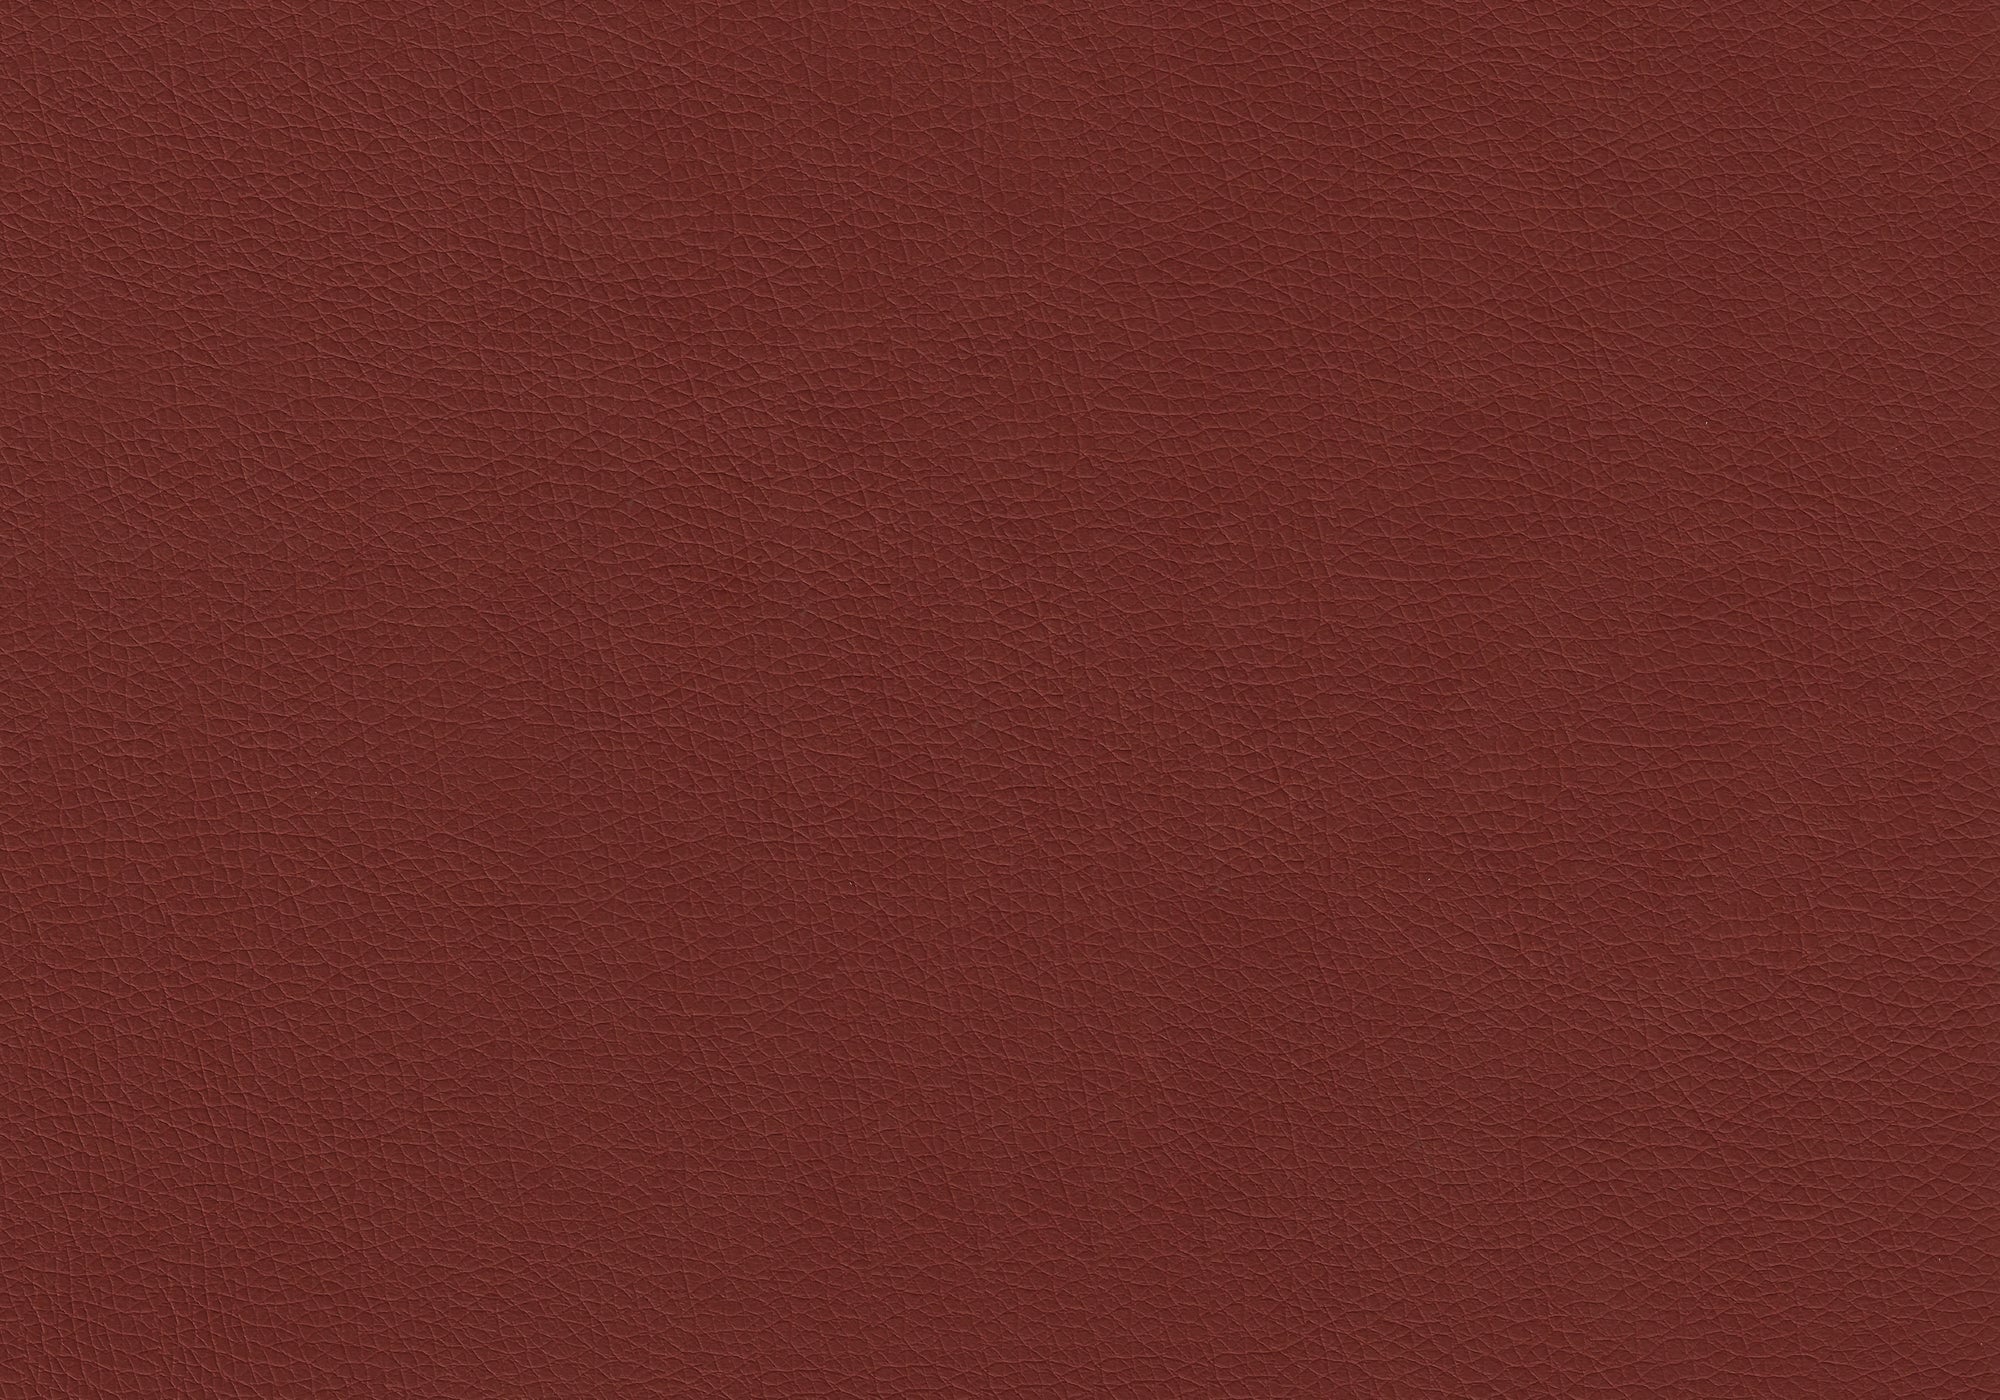 Ottoman - Red Leather-Look Fabric